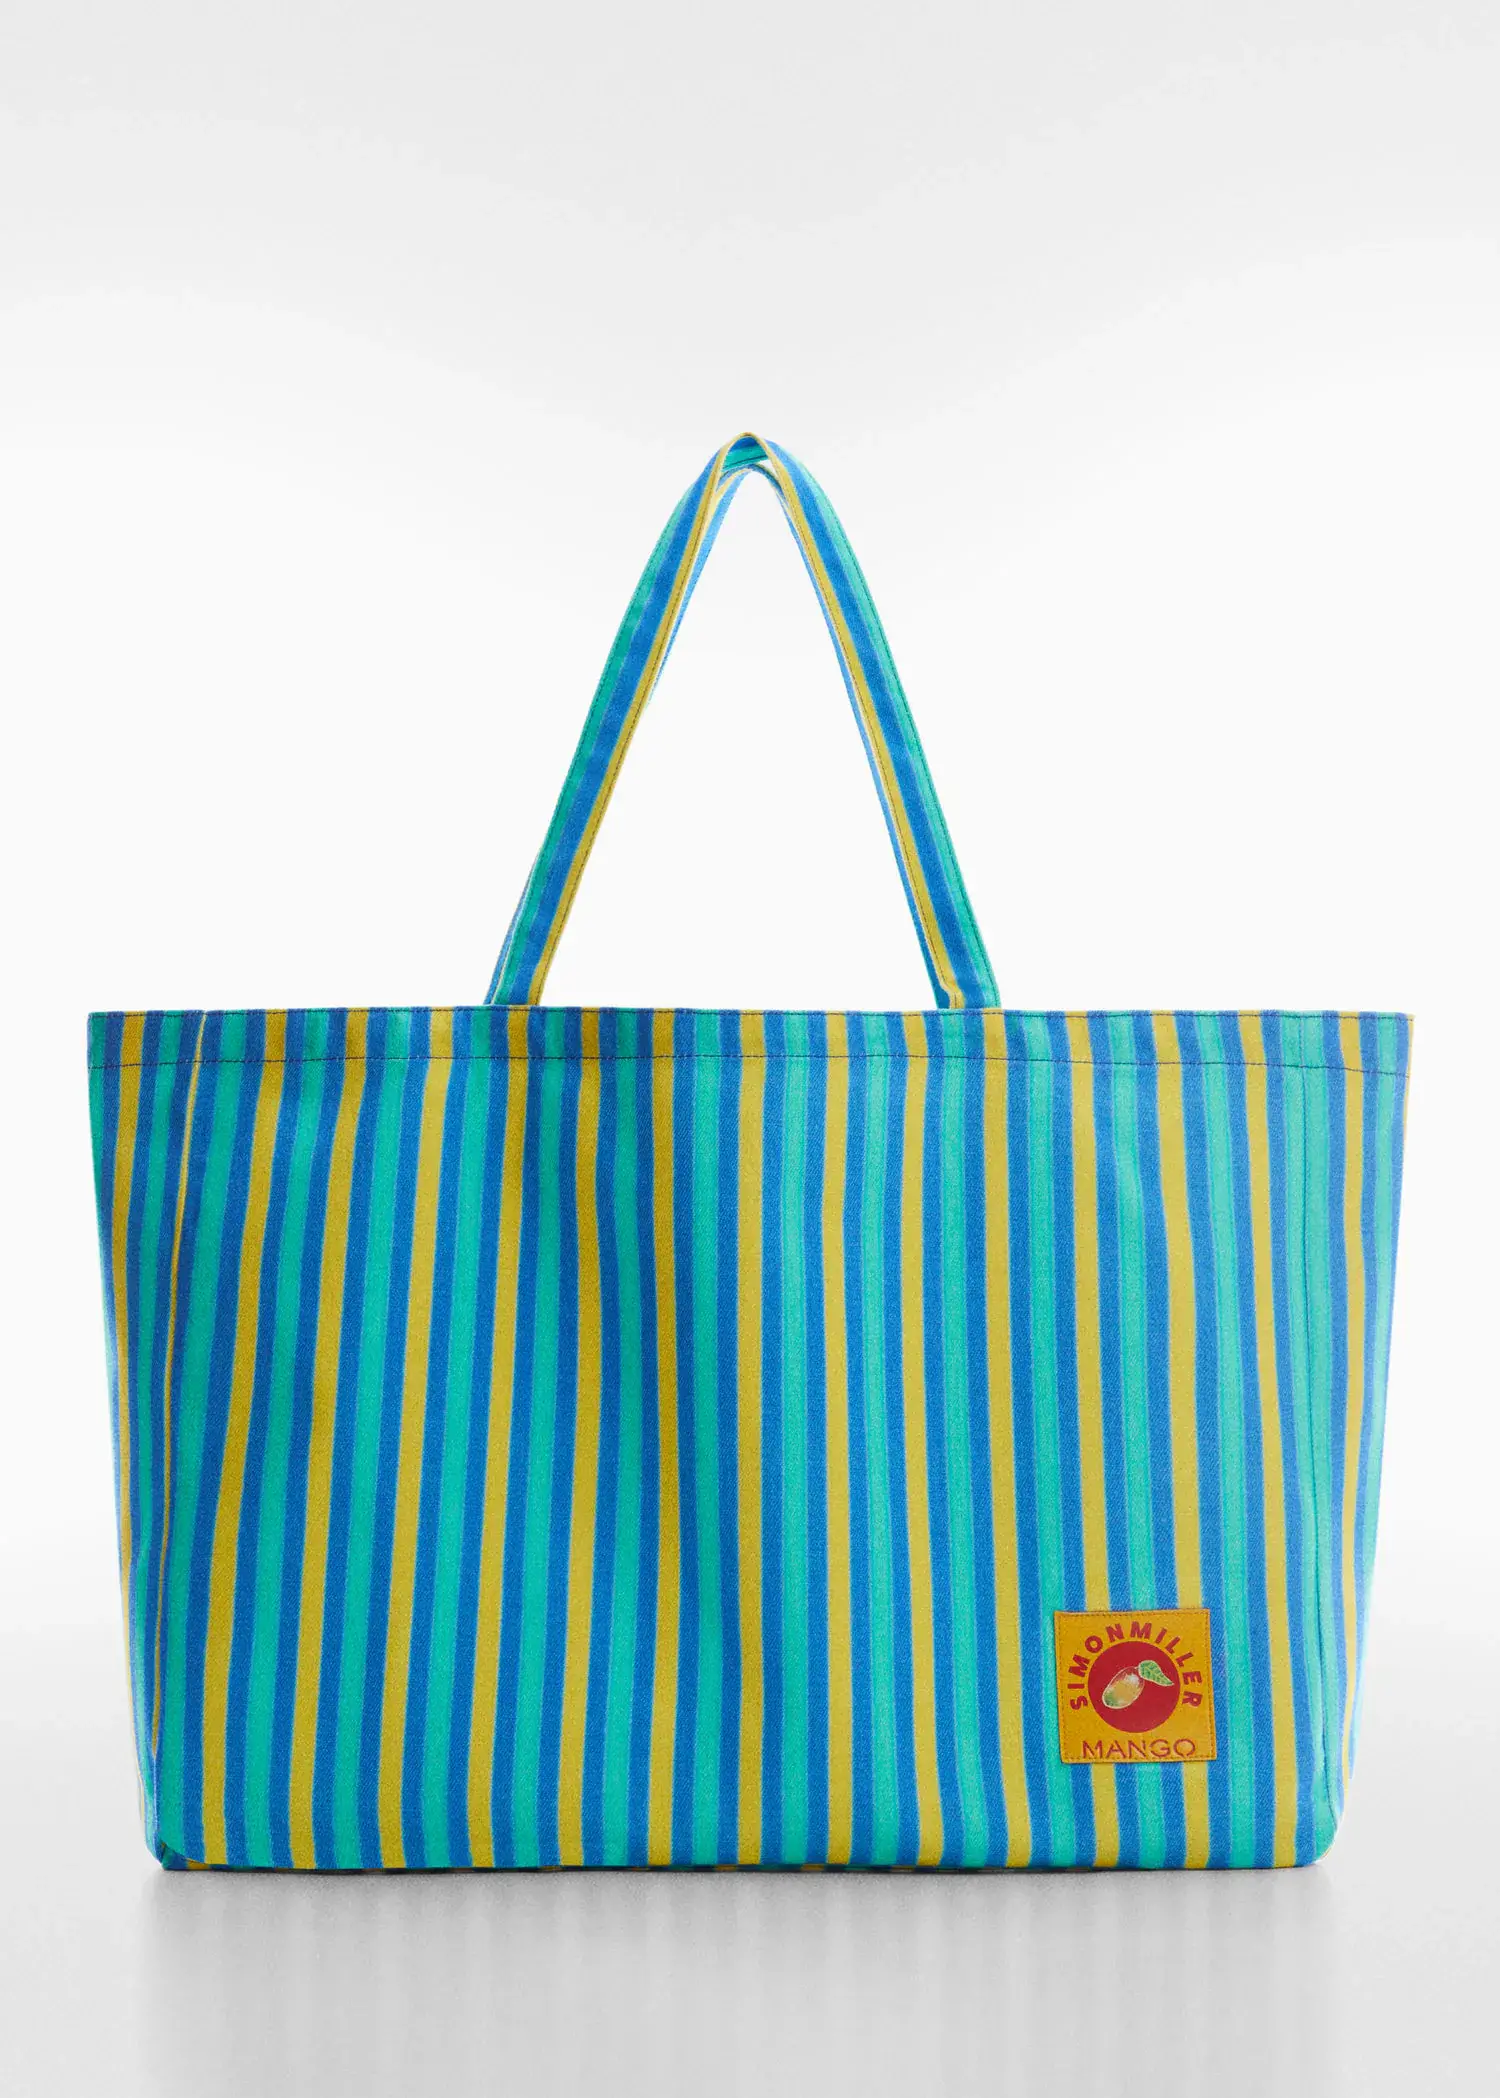 Mango Multi-coloured striped maxi bag. a blue and yellow striped tote bag with a lion patch on it. 